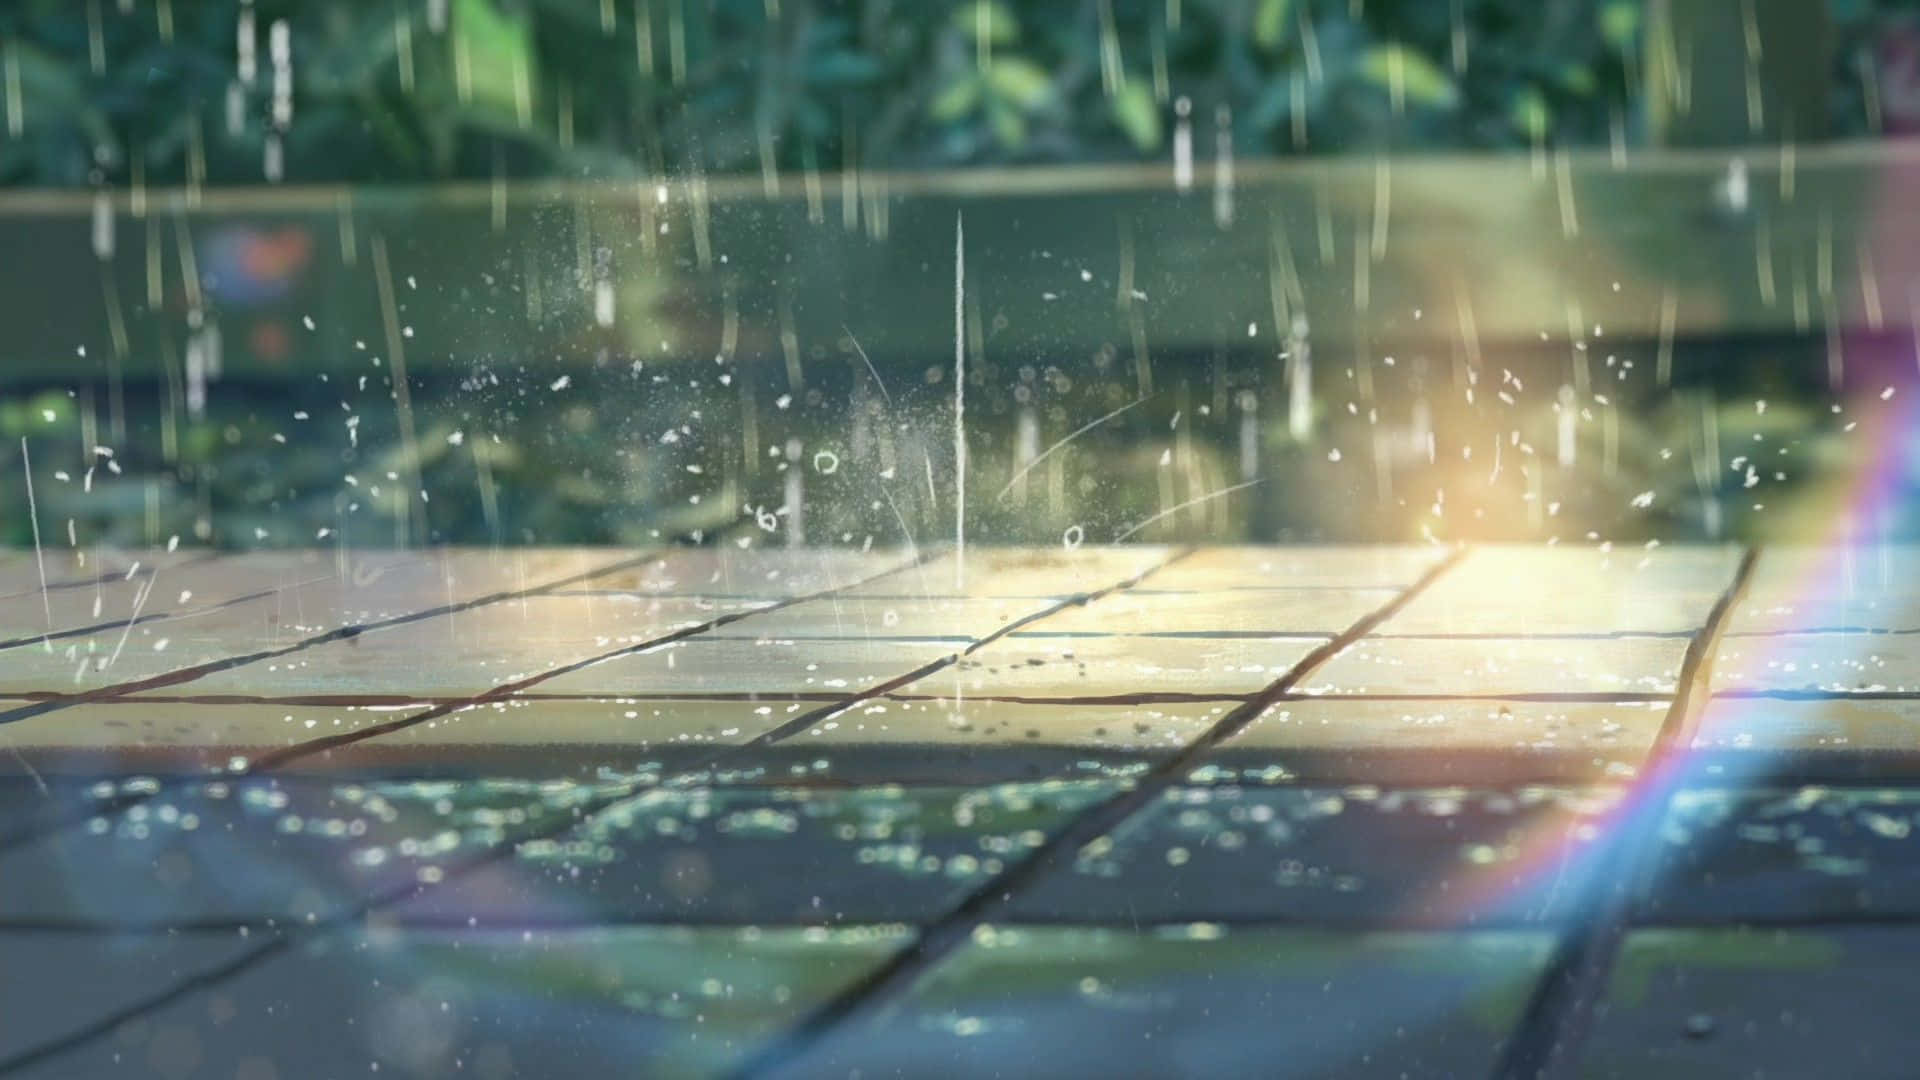 Enjoy The Beauty Of Nature In This Thrilling Scene Of A Rainy Anime Day